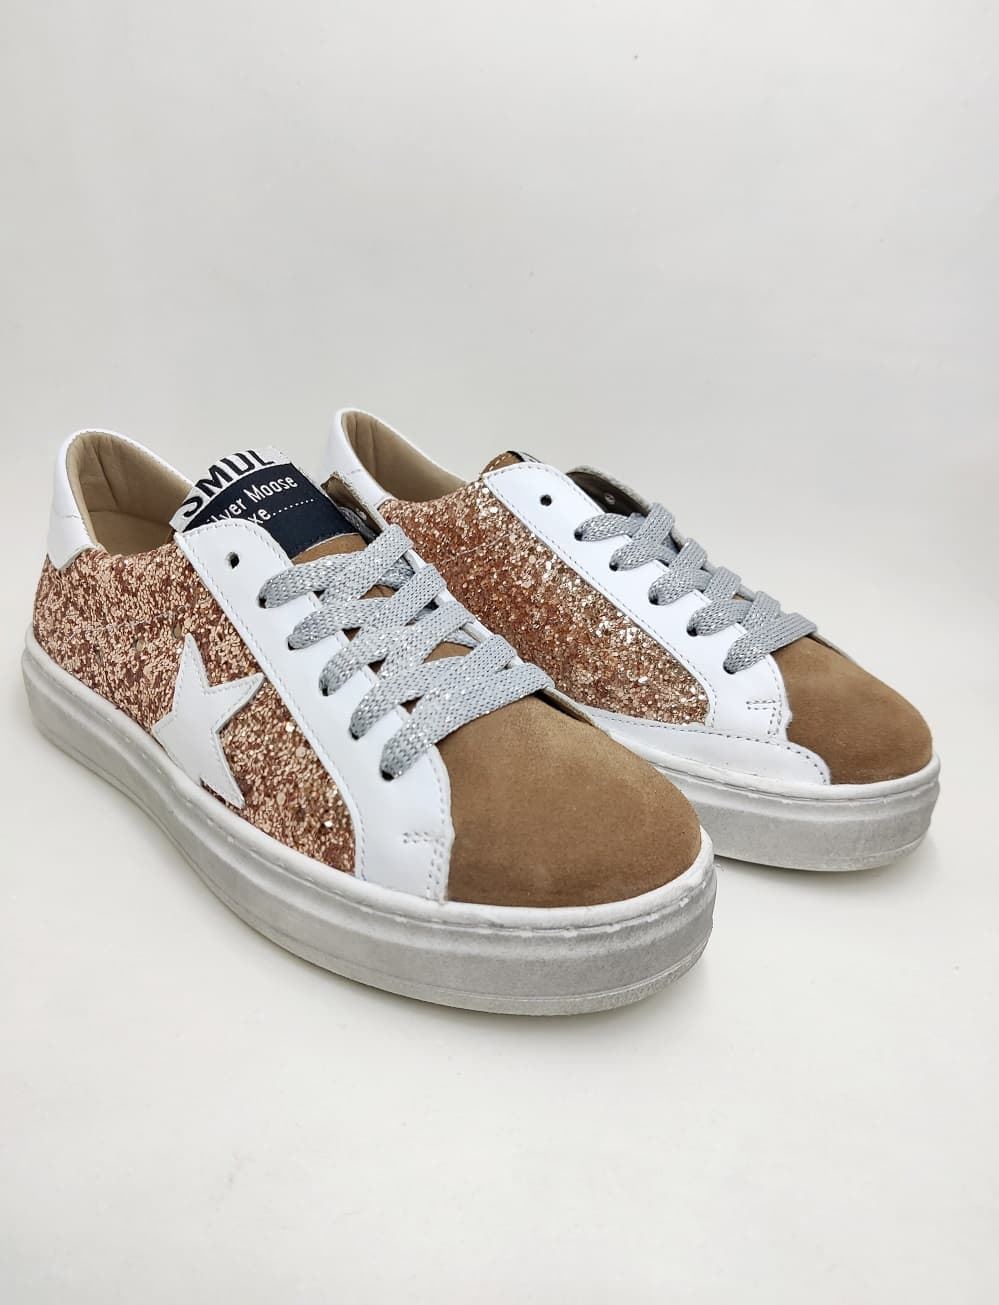 Golden Star Sneakers in Glitter Nude and Mink - Image 4